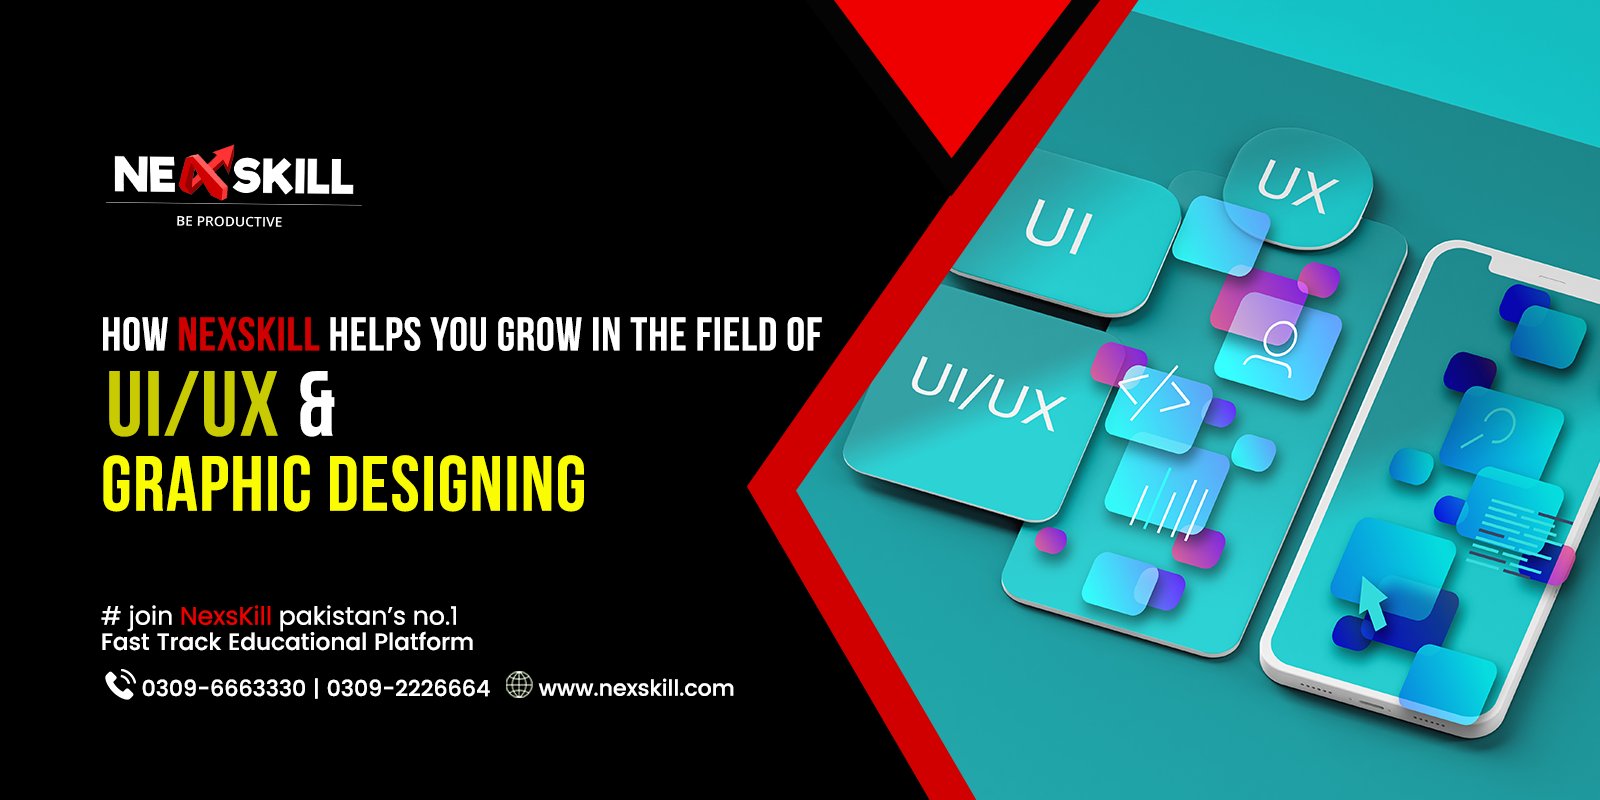 How Nexskill Helps You Grow in the Field of UI/UX & Graphic Designing